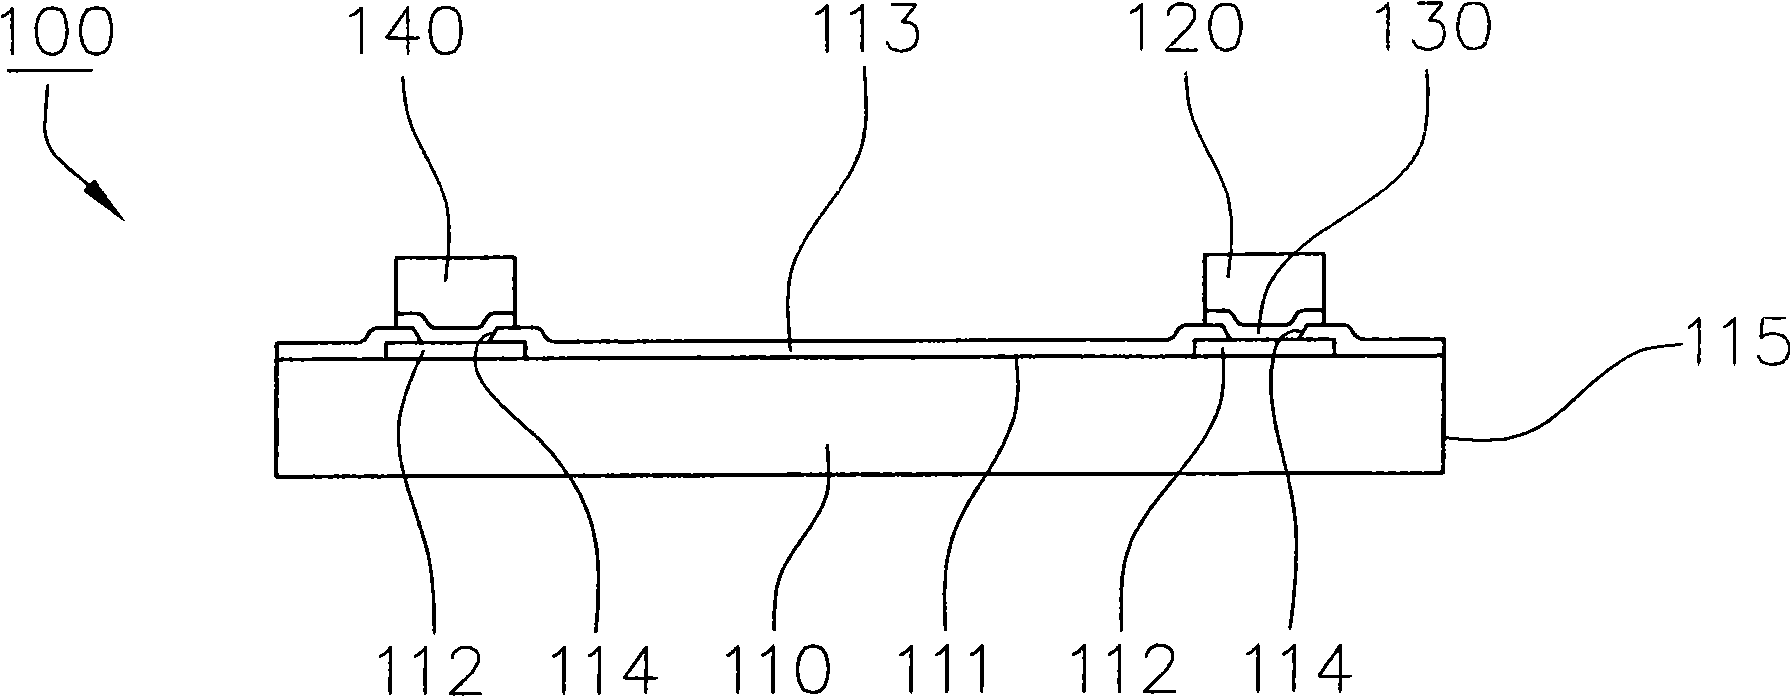 Wafer structure of projection definization